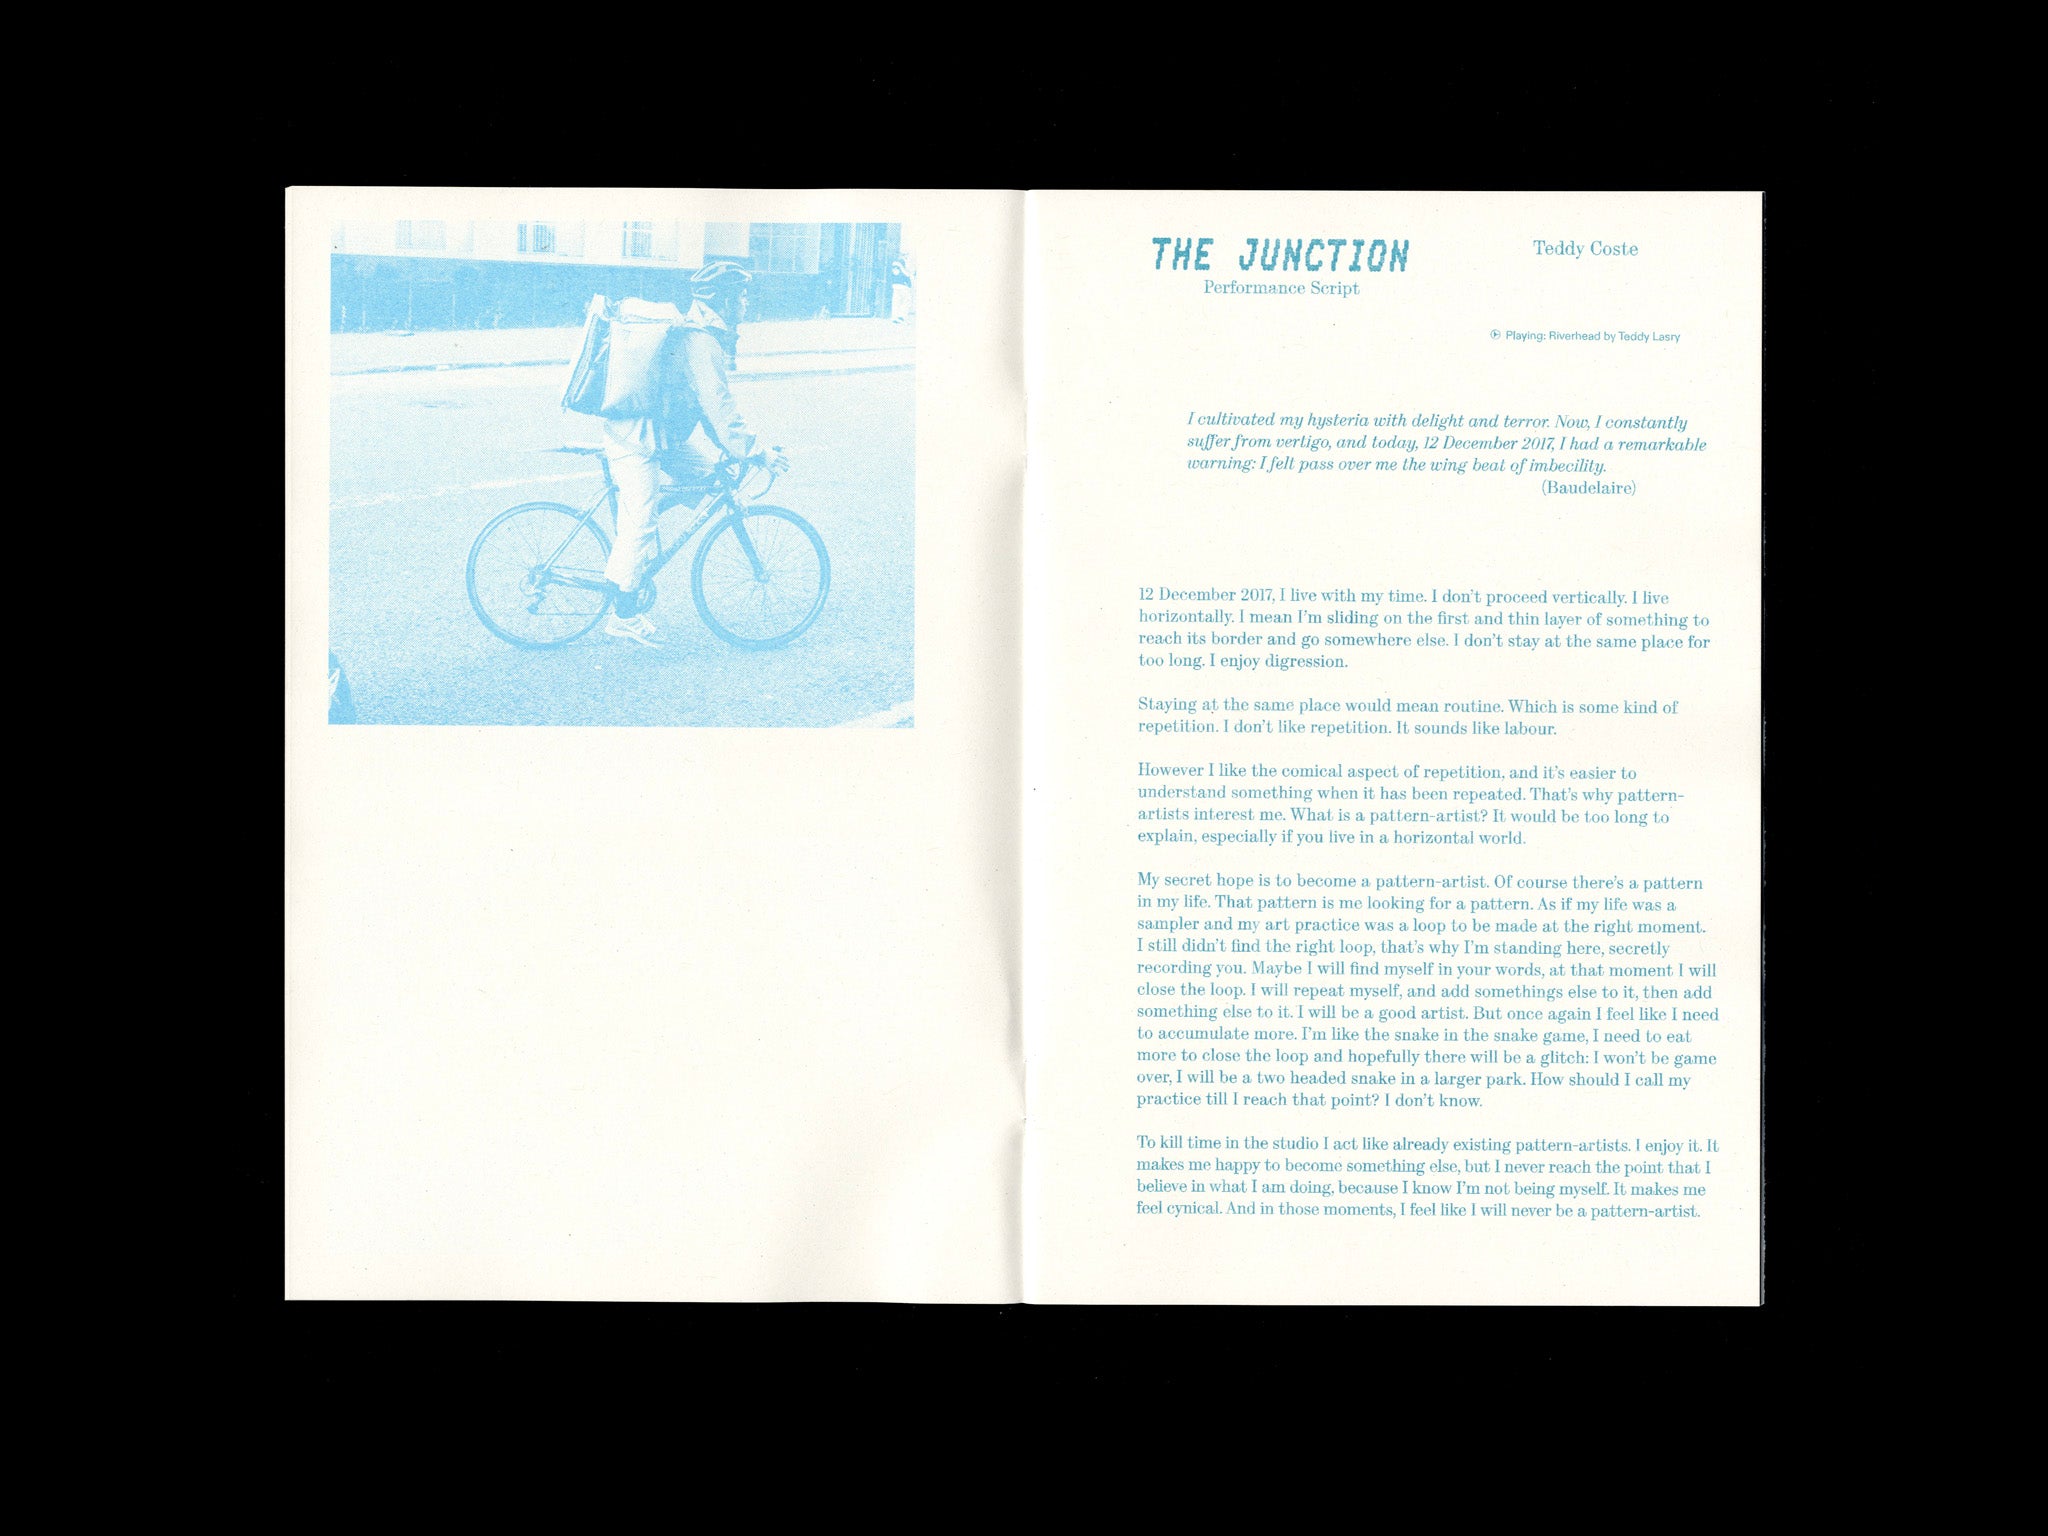 THE JUNCTION: DOCUMENTATION OF A PERFORMANCE BY TEDDY COSTE